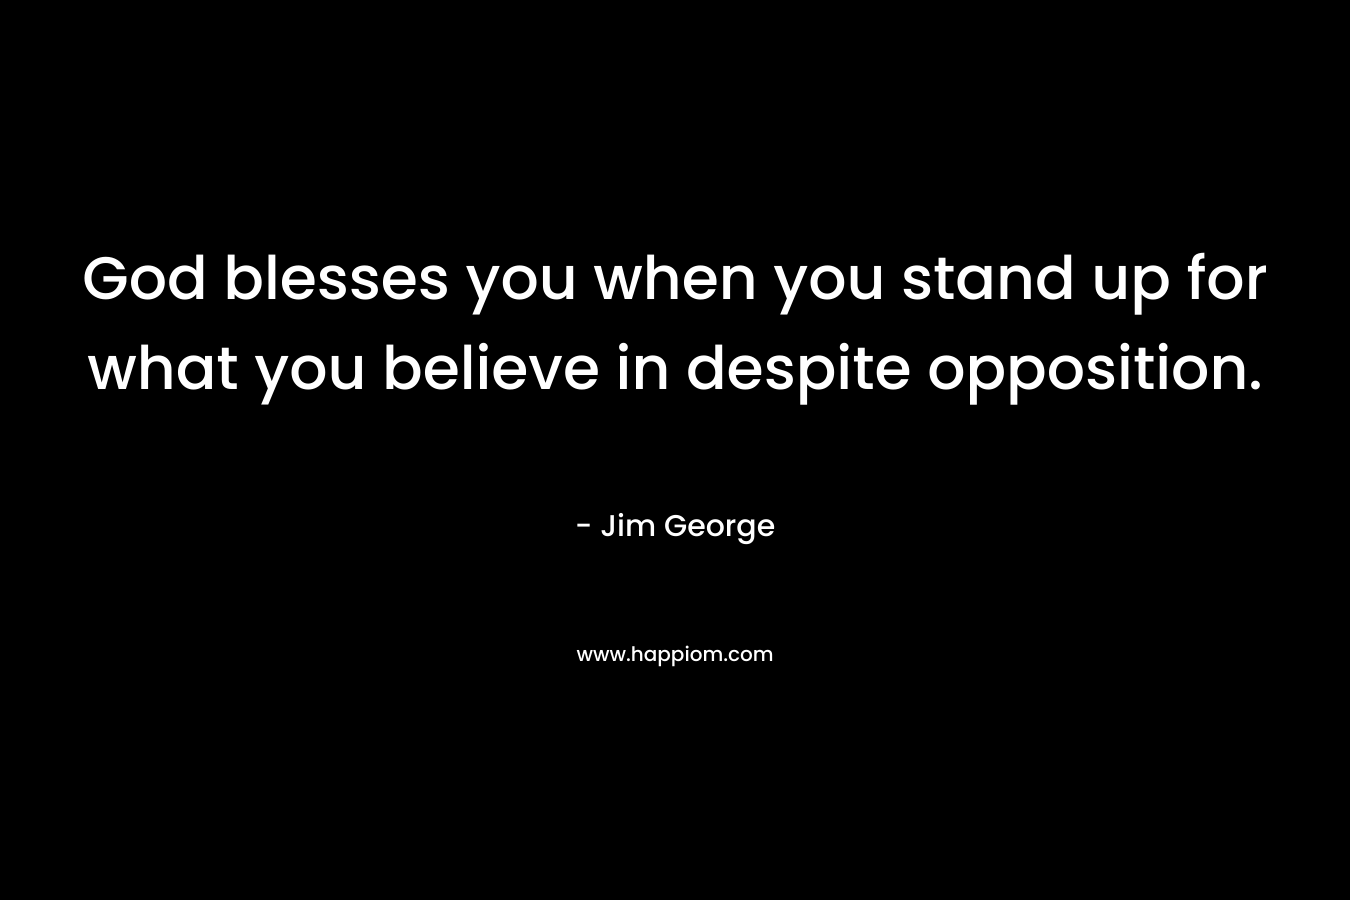 God blesses you when you stand up for what you believe in despite opposition.